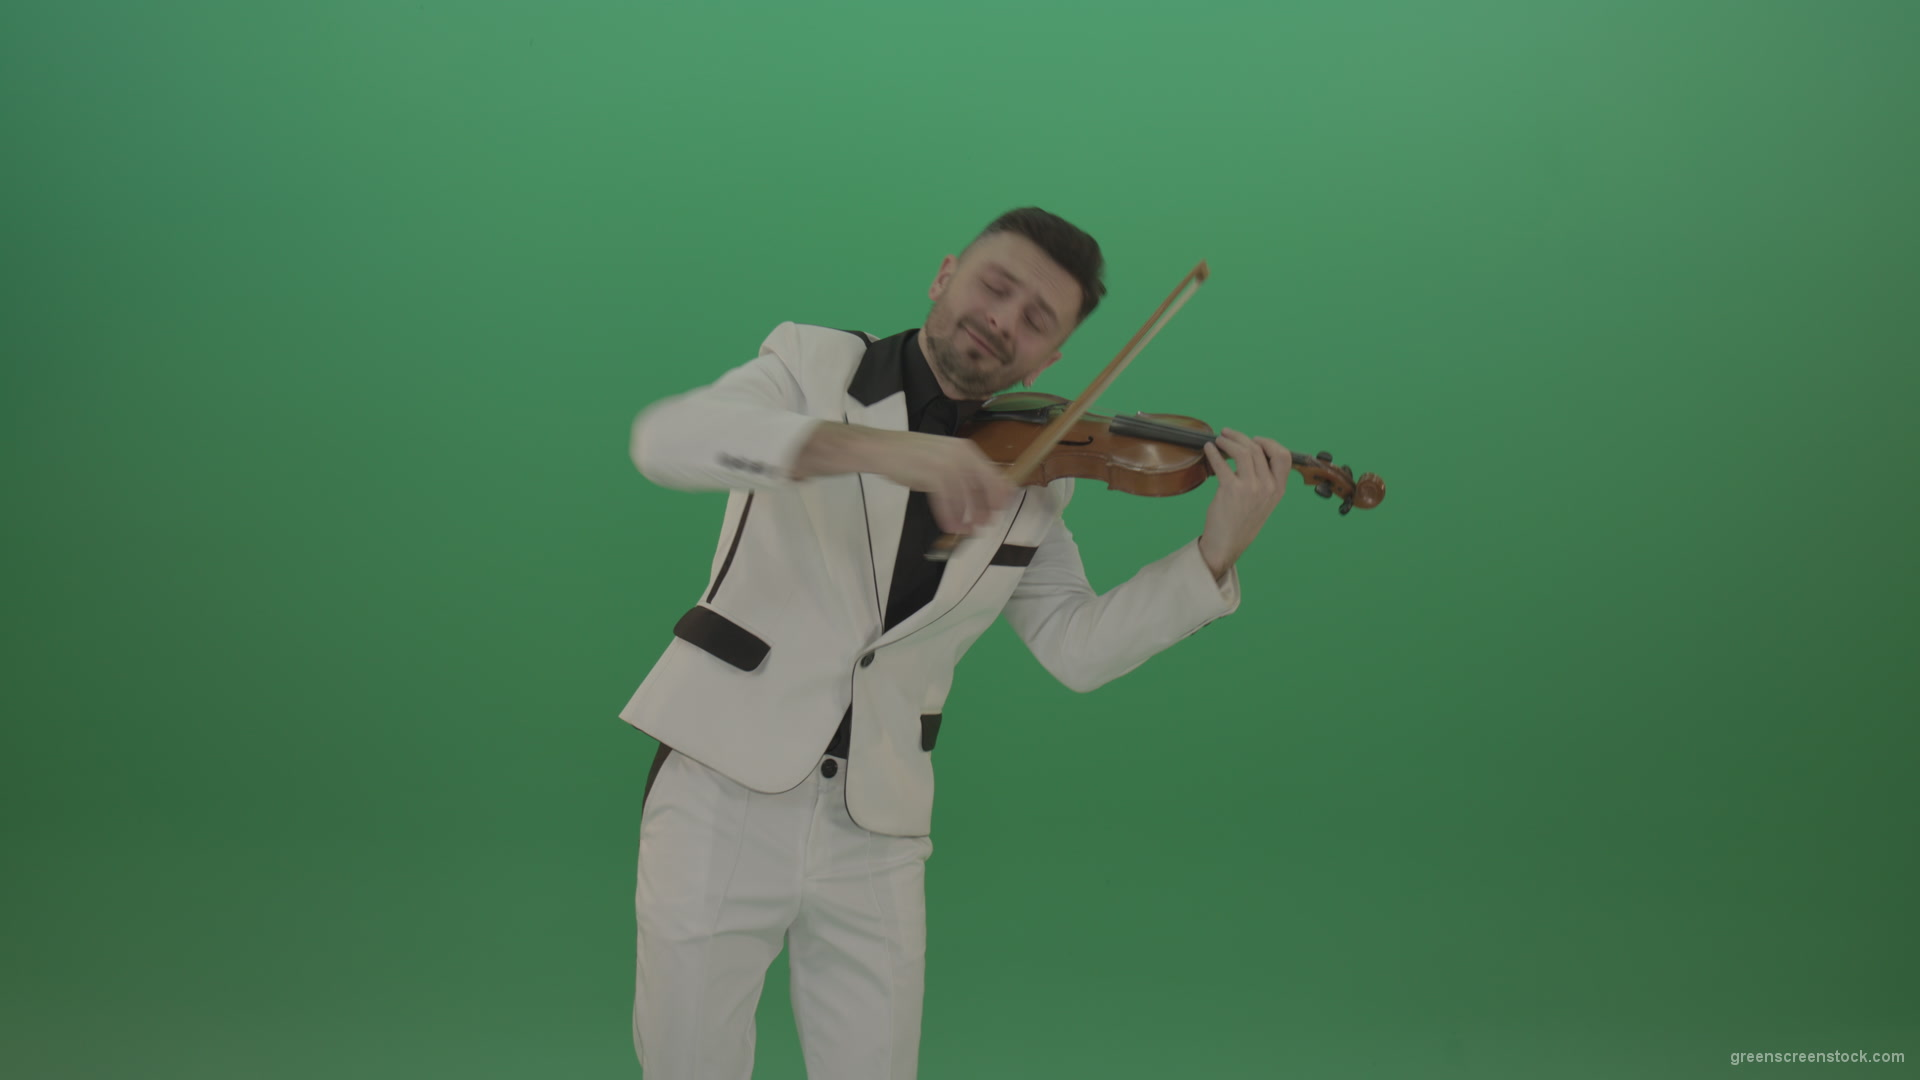 Happy-man-in-white-costume-dramatic-playing-violin-music-instrument-isolated-on-green-screen_008 Green Screen Stock